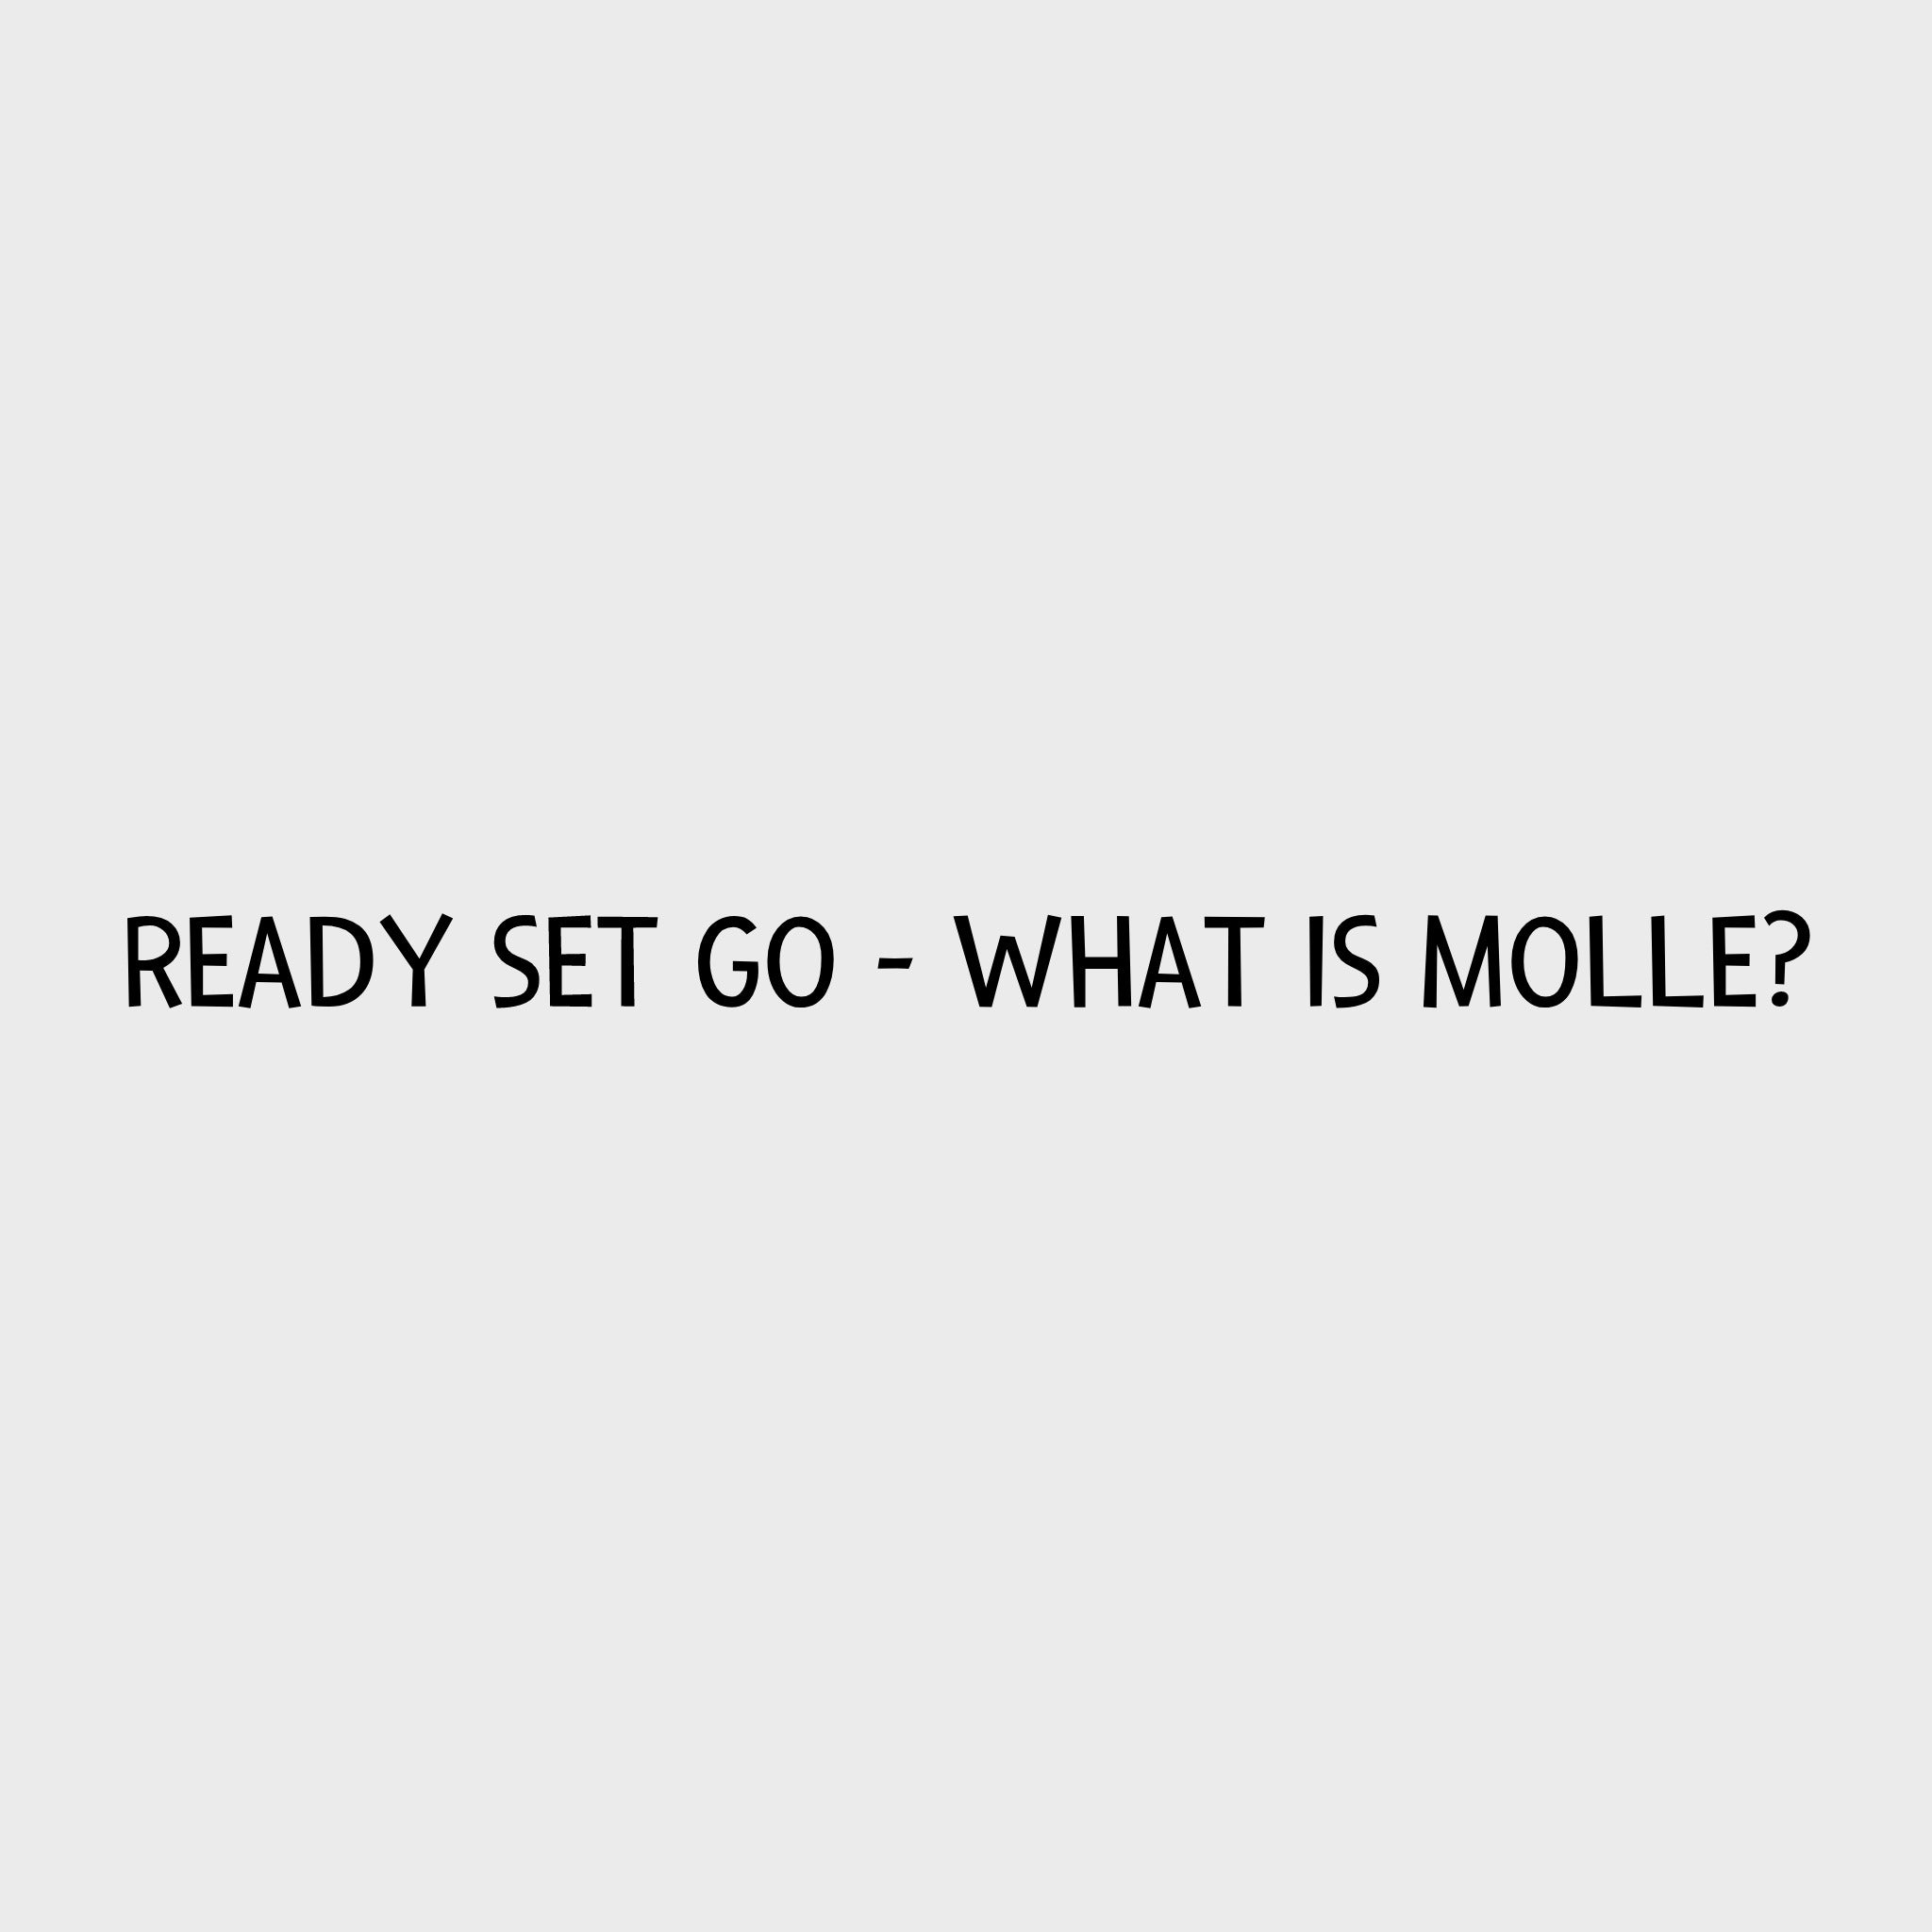 Ready Set Go - What is MOLLE?